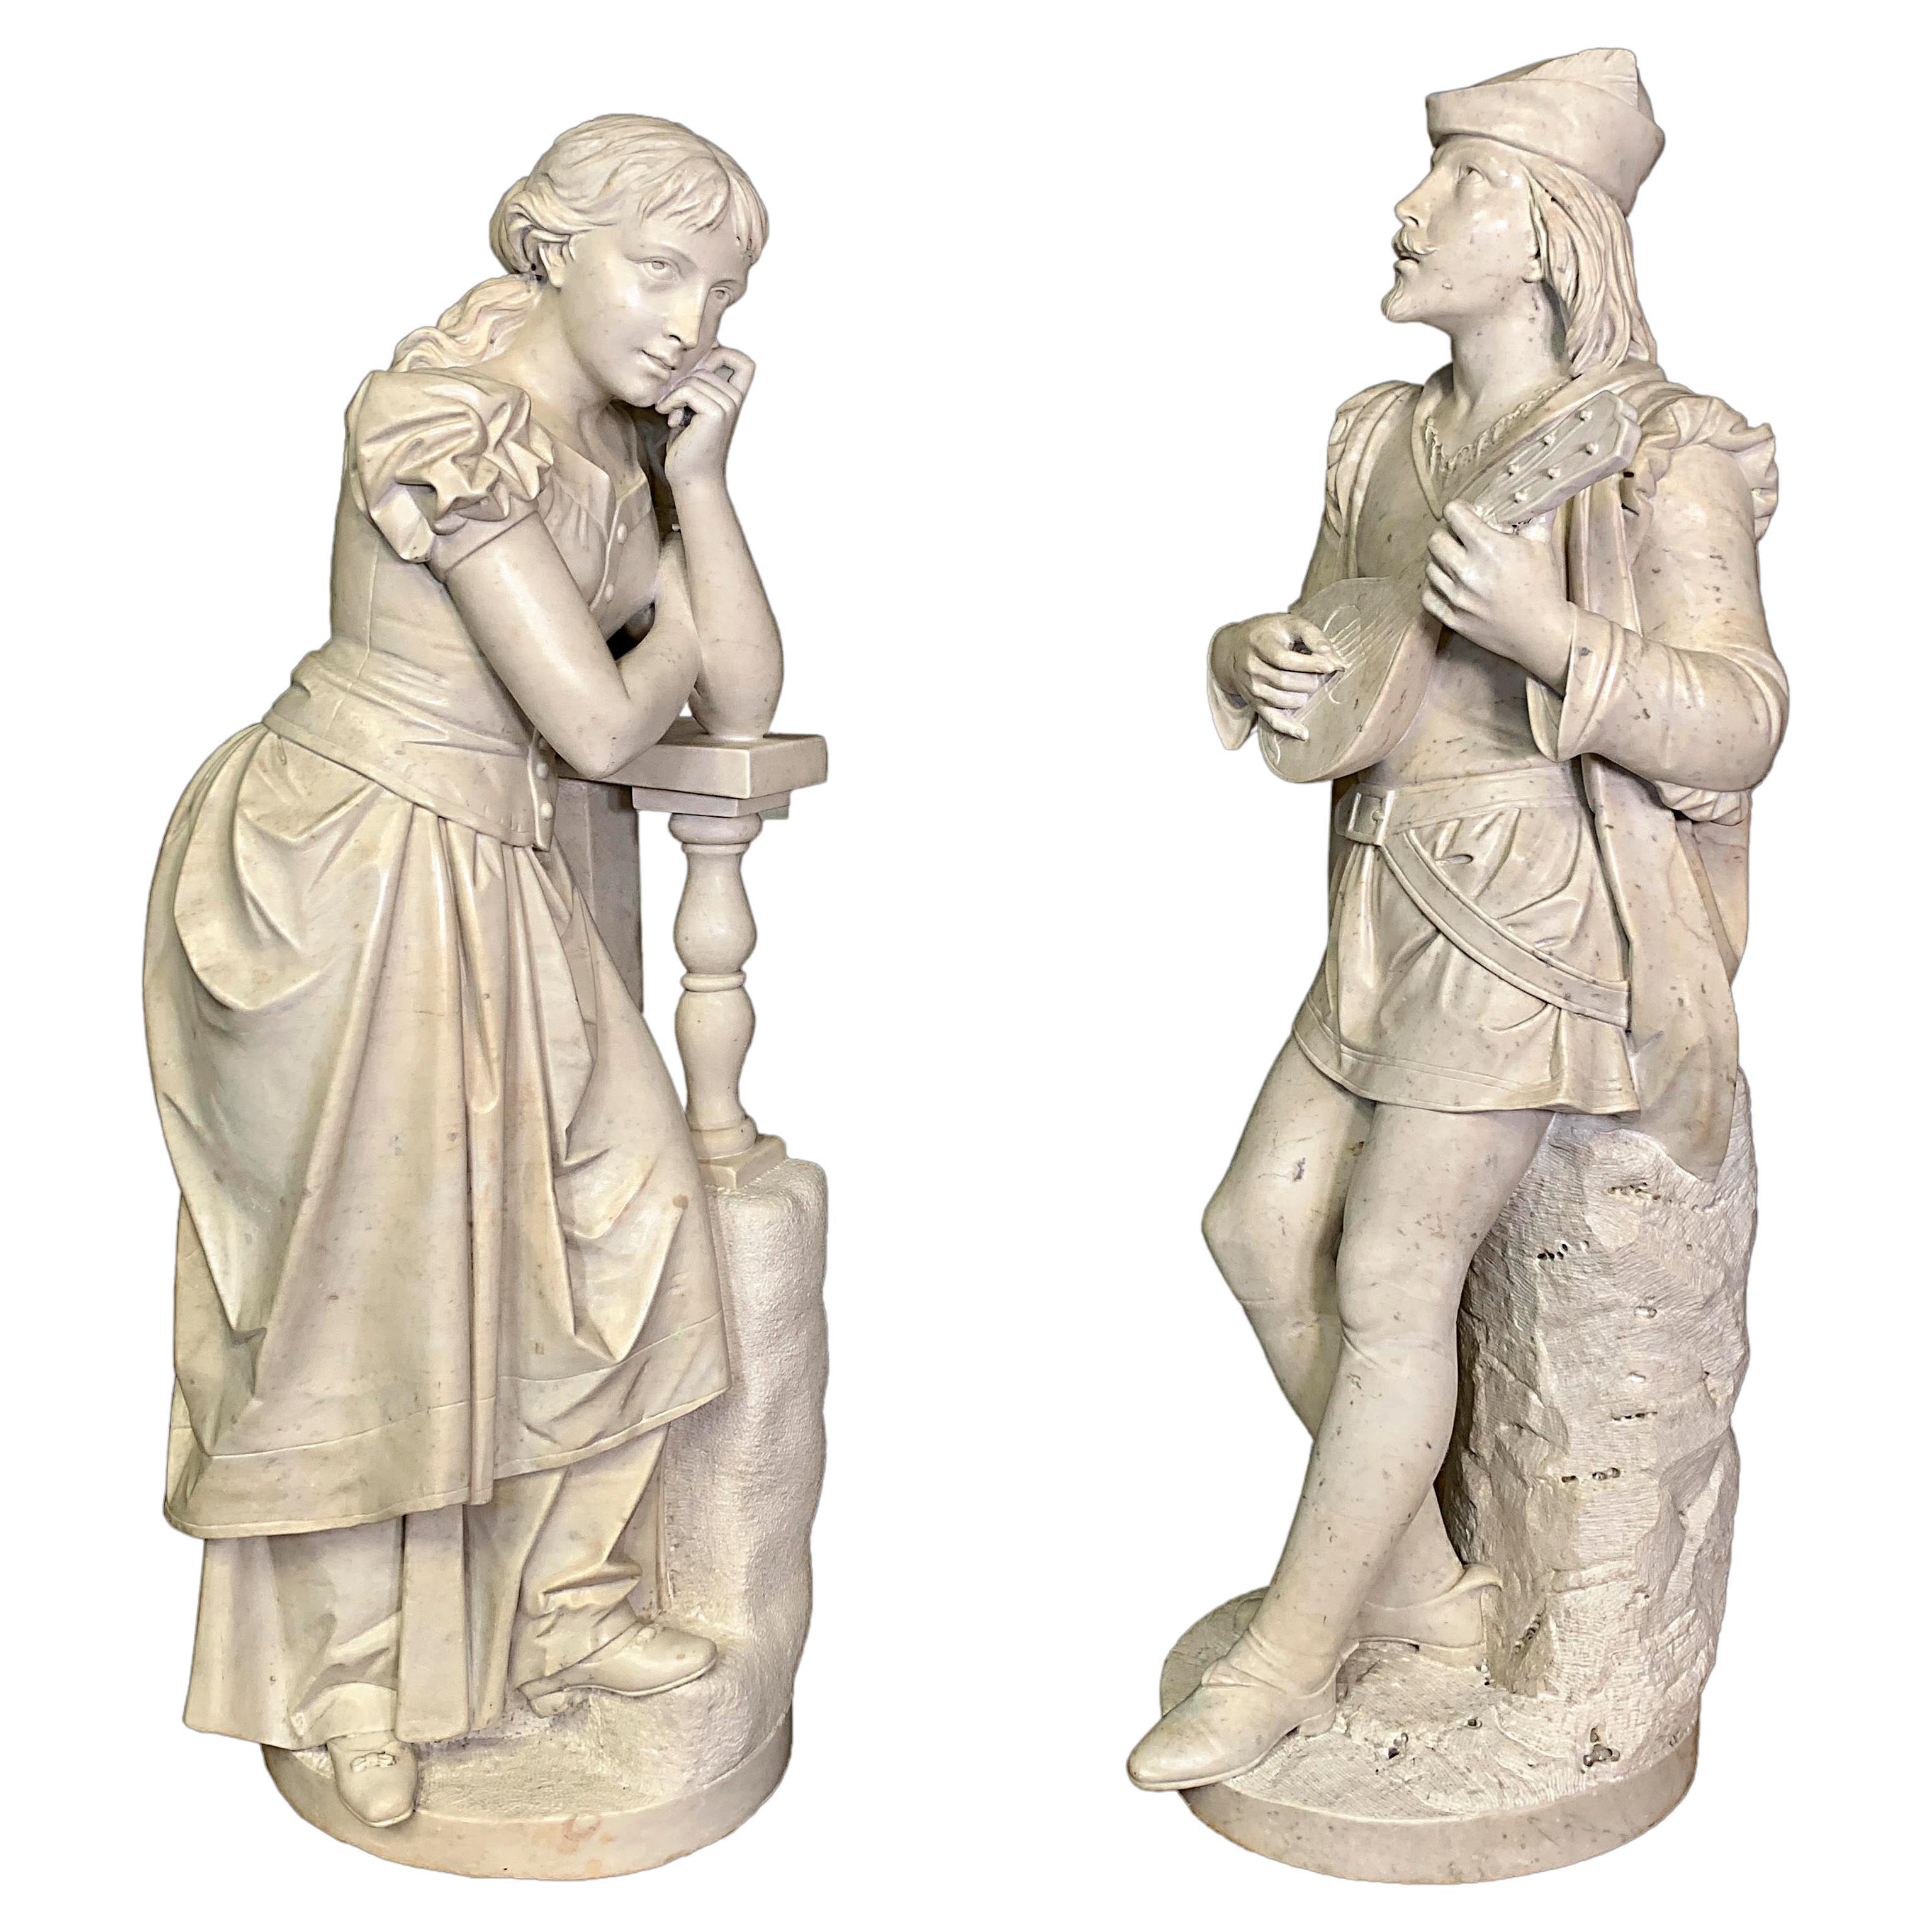 Romeo and Juliet, a pair of antique Italian Carved Marble Sculptures